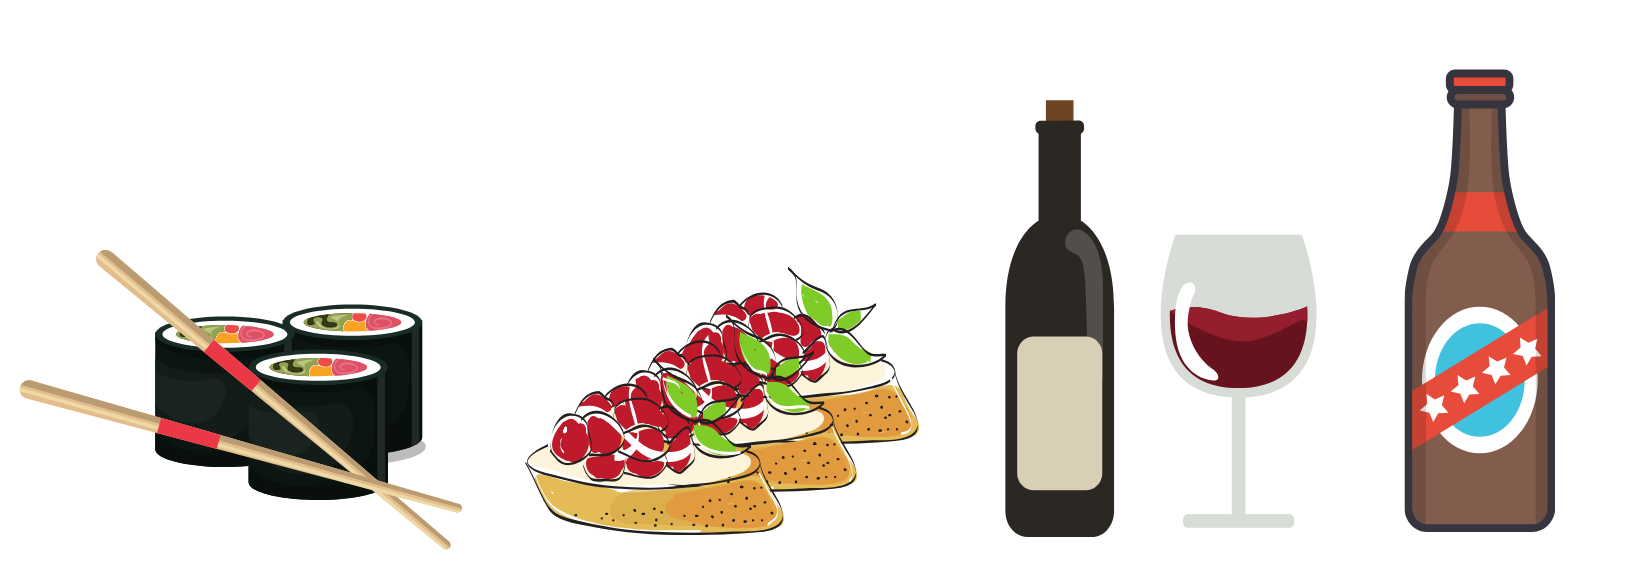 happy hour food clipart